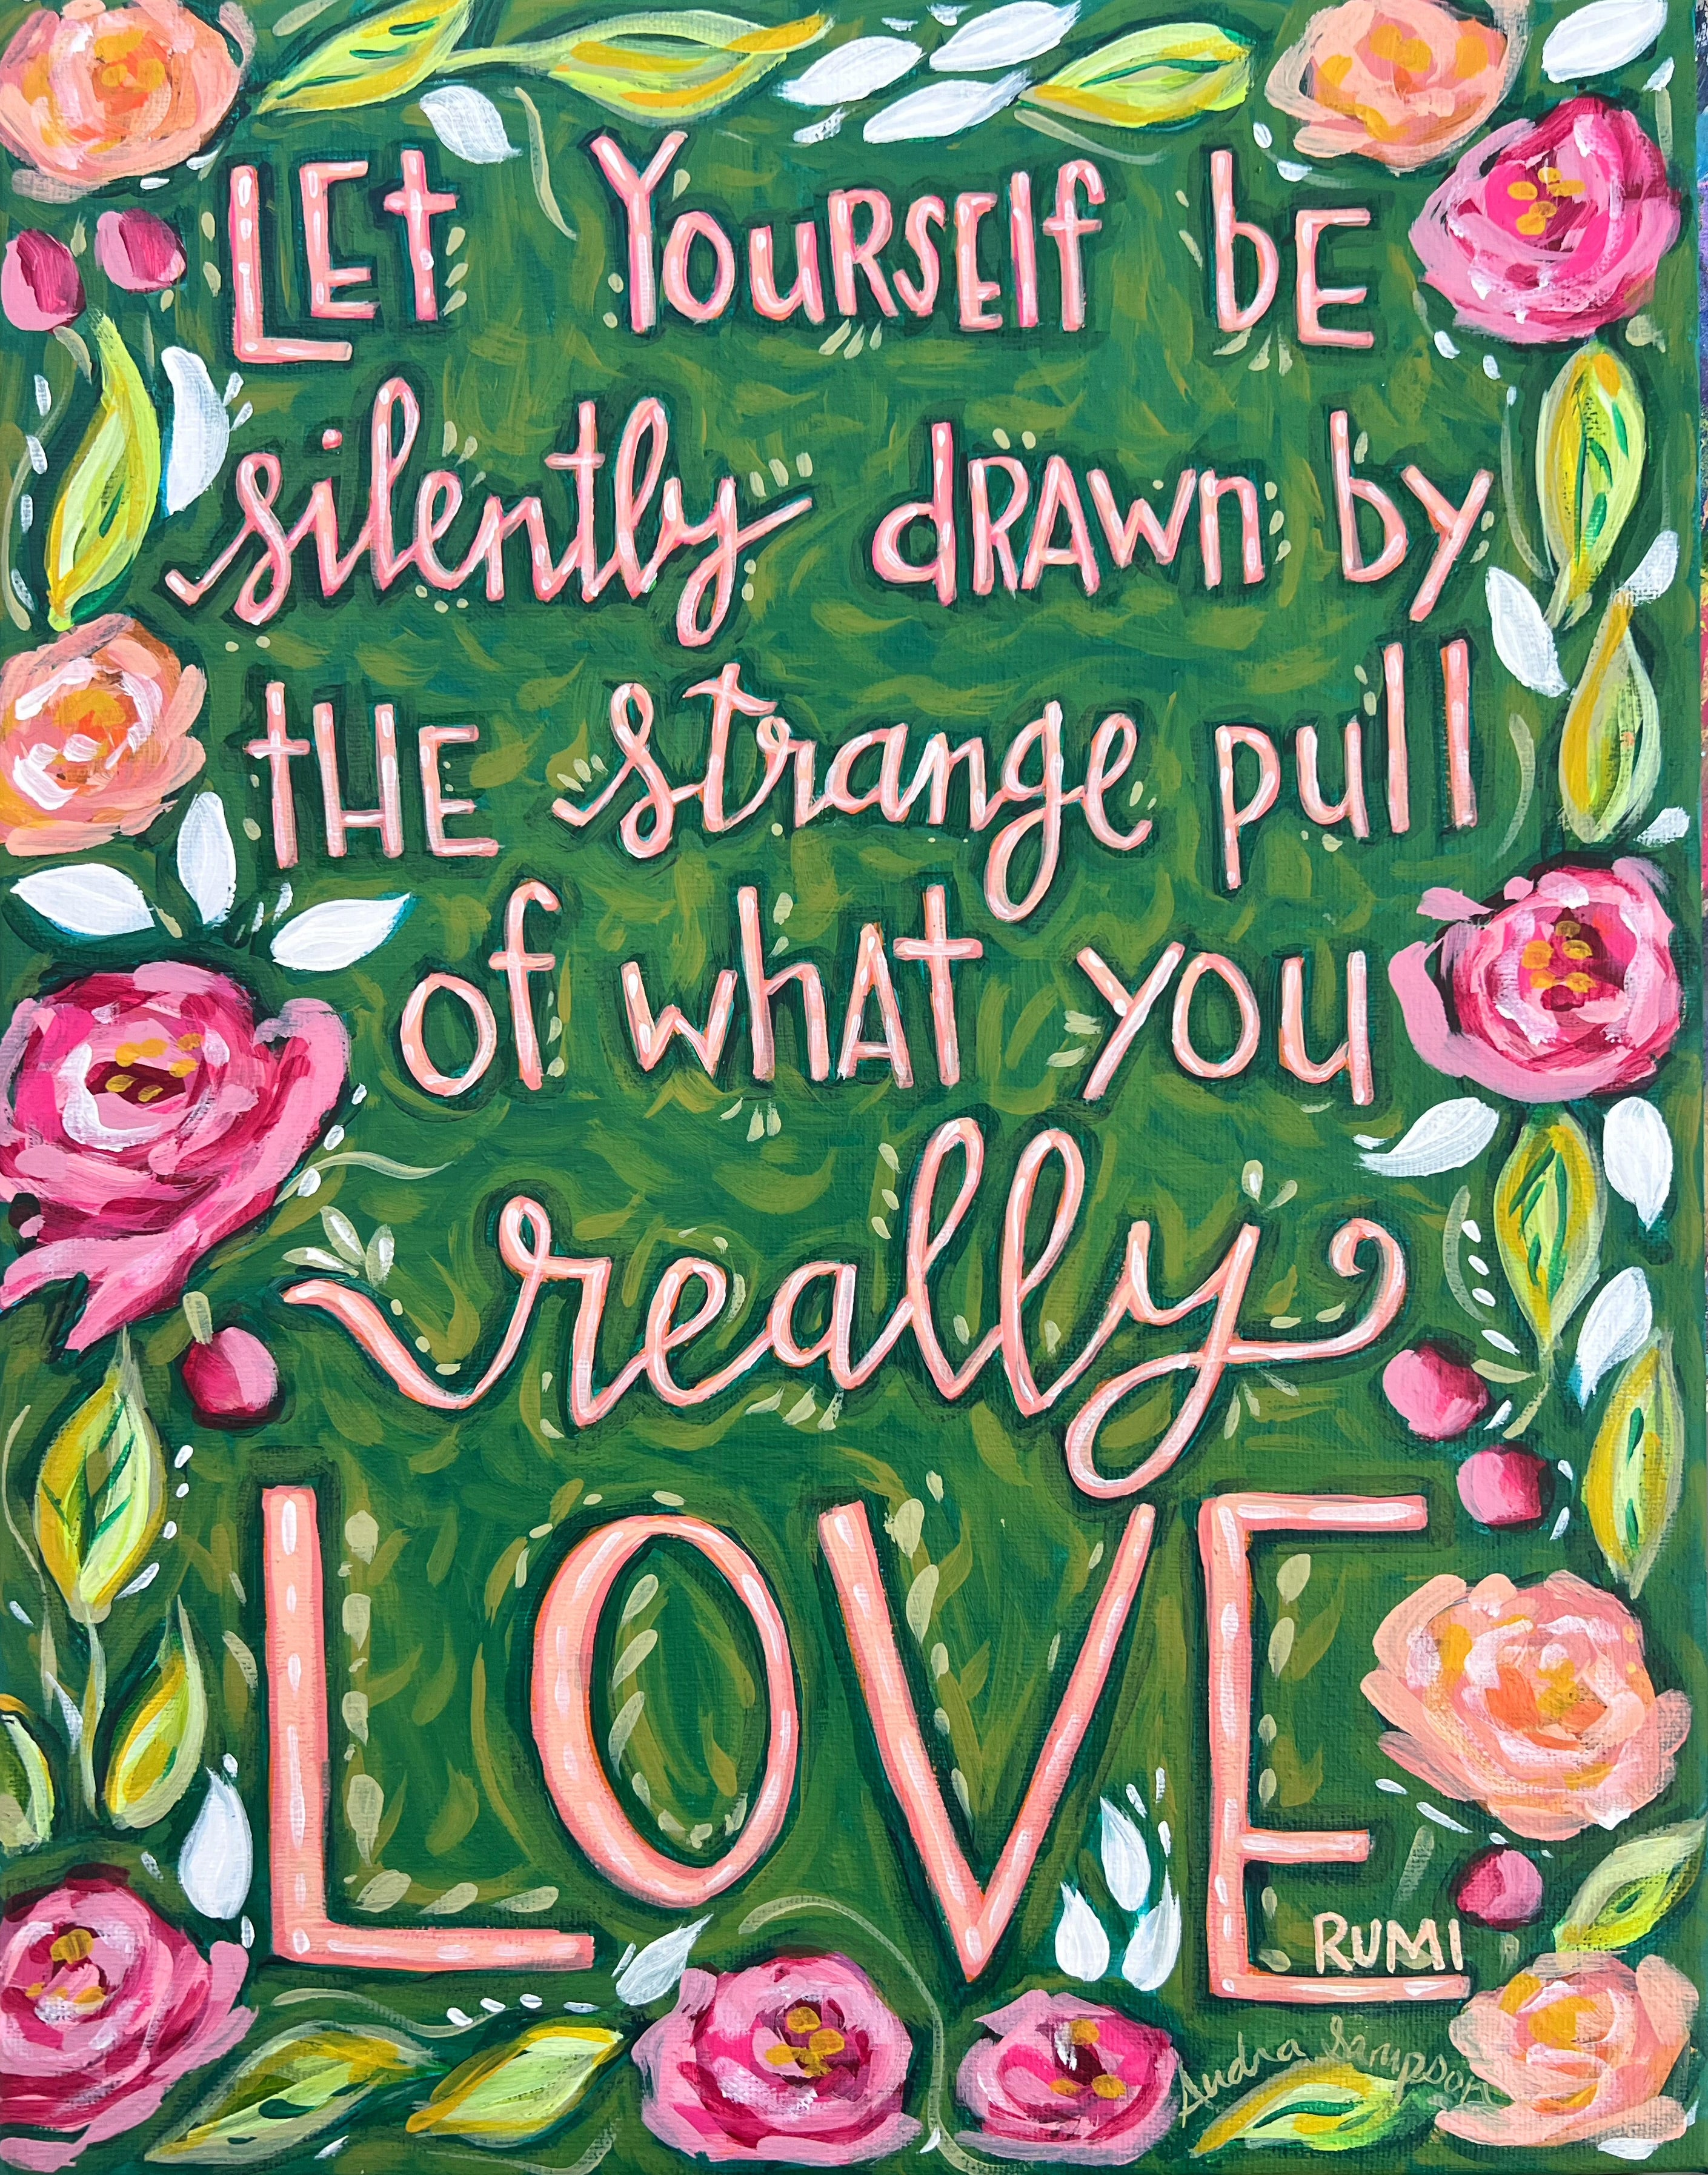 Rumi Quote Reproduction Print - On Paper or Canvas